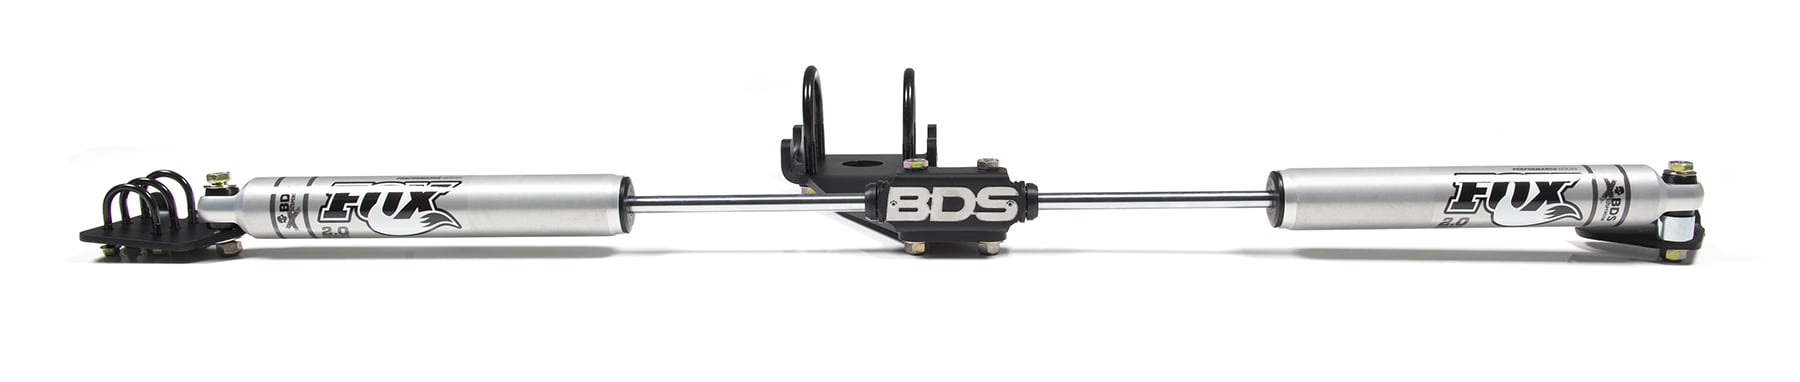 BDS BDS55371 Fox 2.0 Dual Steering Stabilizer for 2009-2013 Dodge Ram 2500/3500 